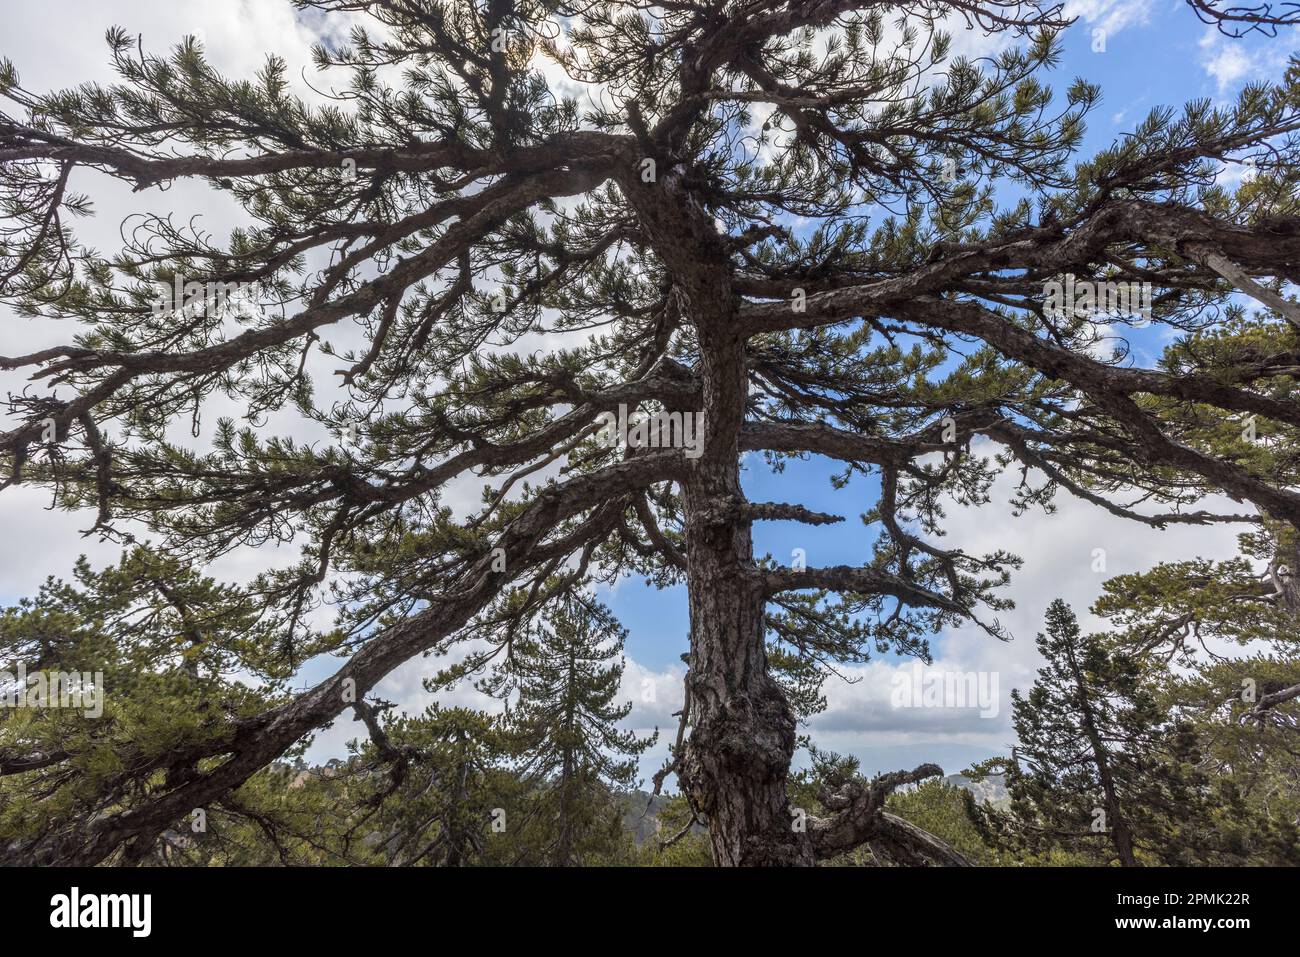 The black pine is the heraldic tree in the Troodos Mountains. The robust tree is exposed to wind and snow. Hiking in the Troodos Mountains, Cyprus Stock Photo